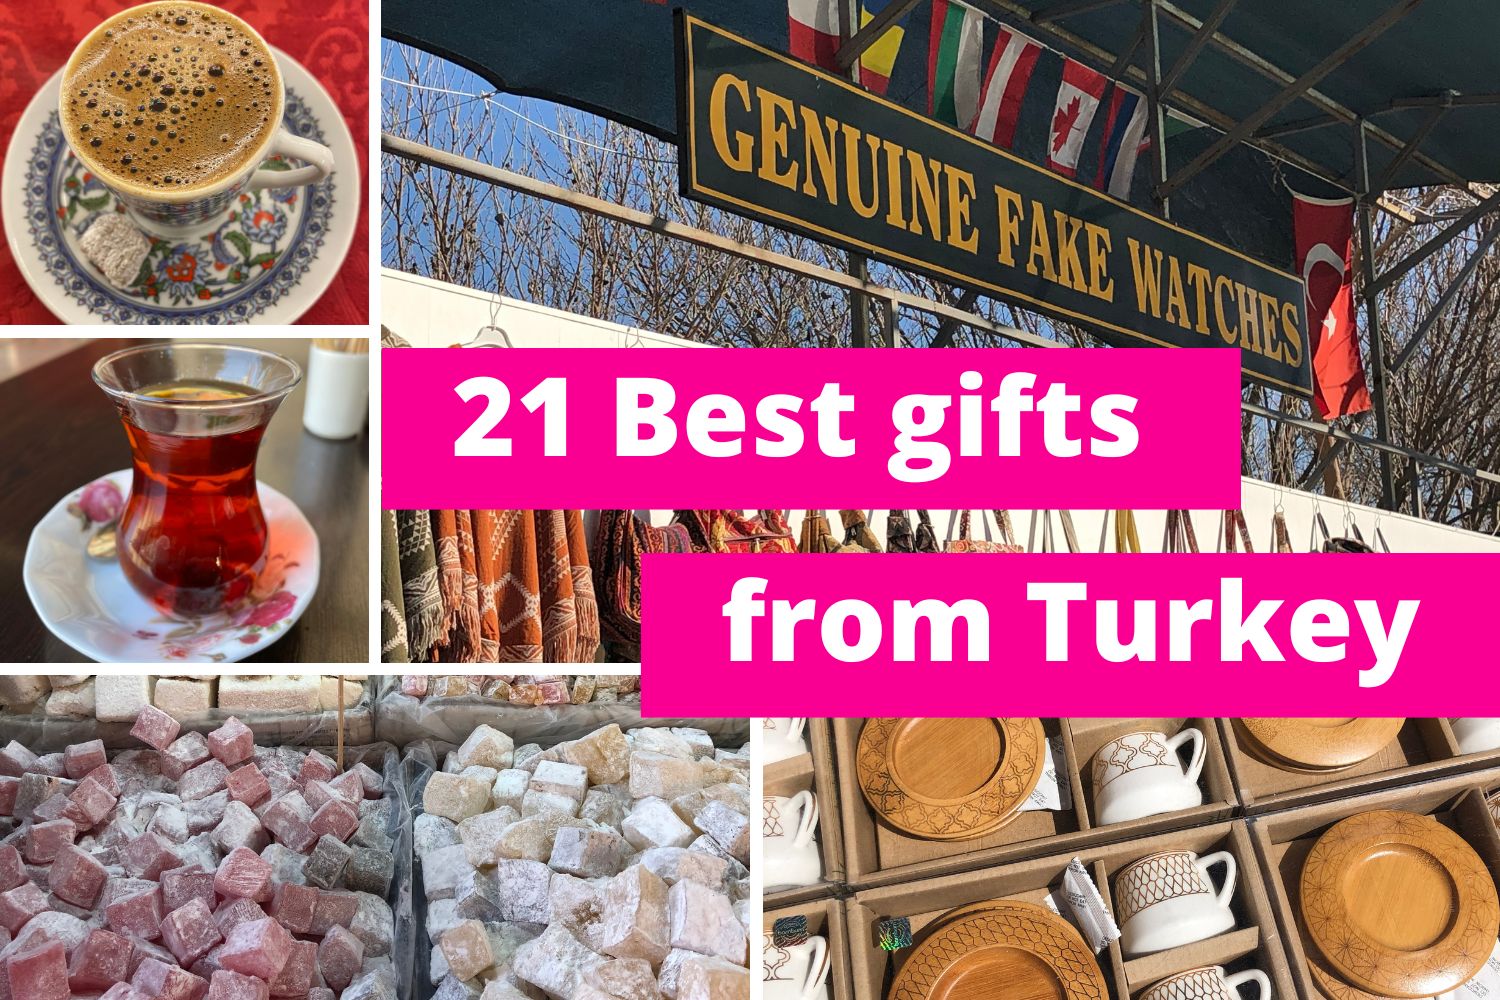 Gifts from Turkey